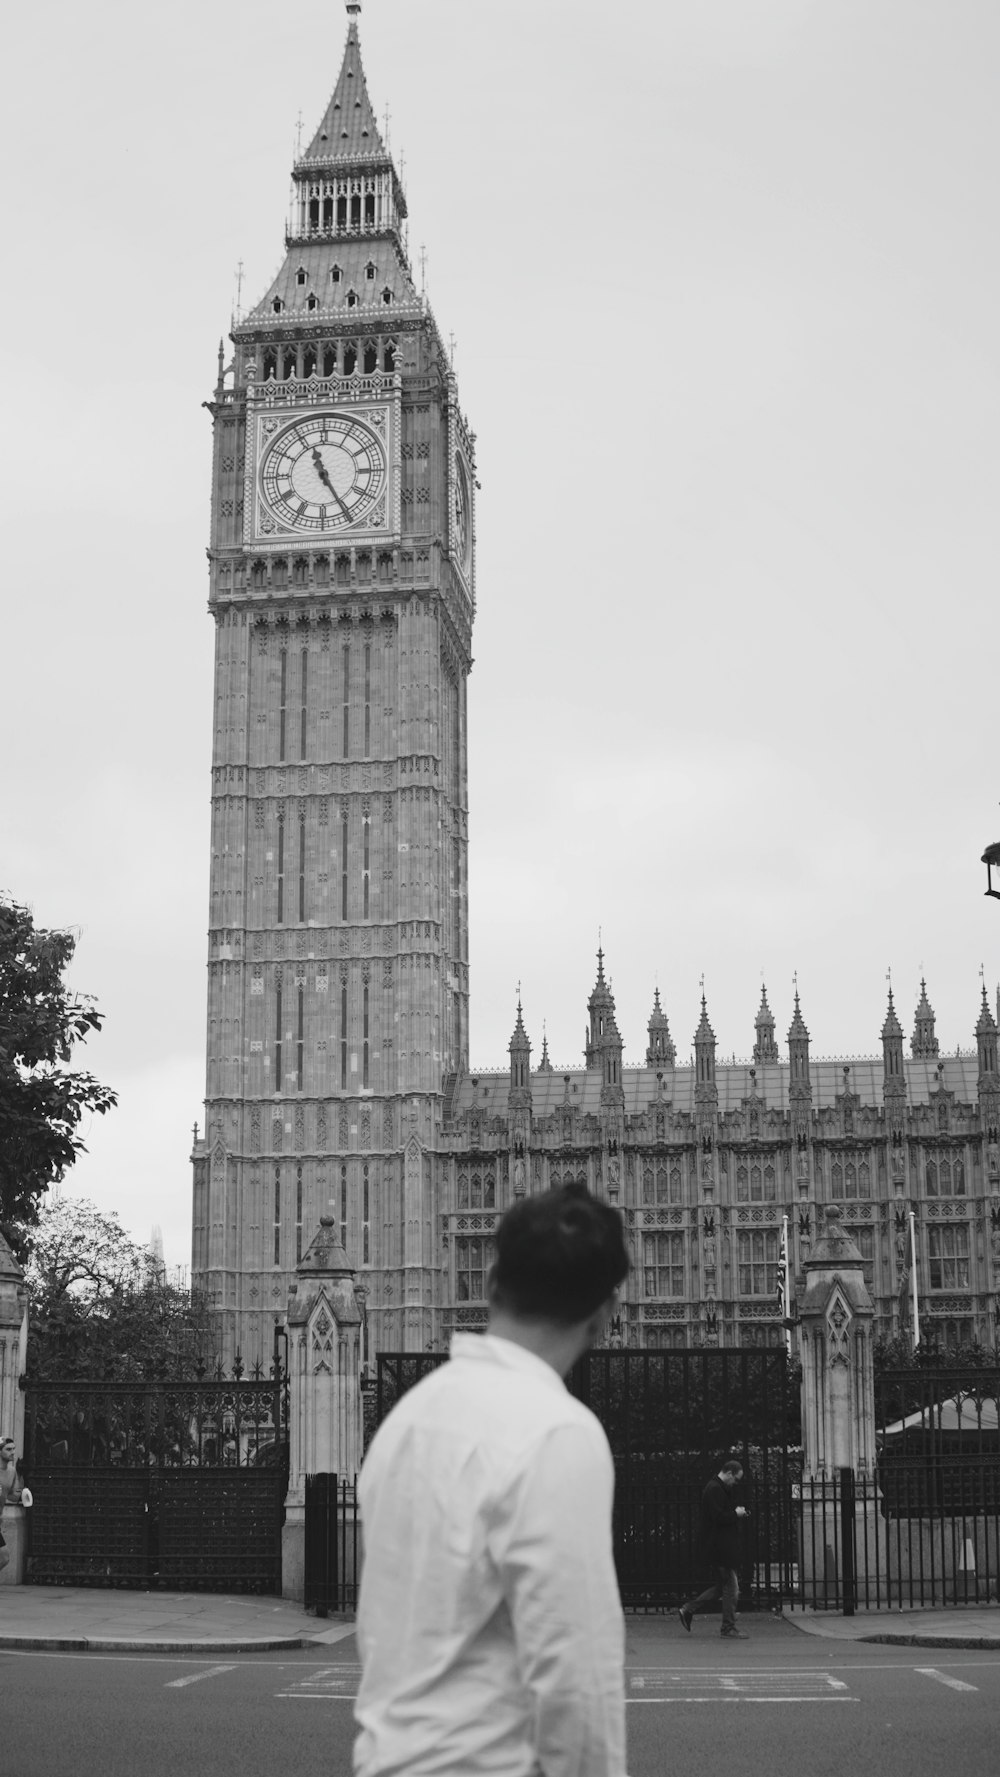 a man standing in front of a tall clock tower